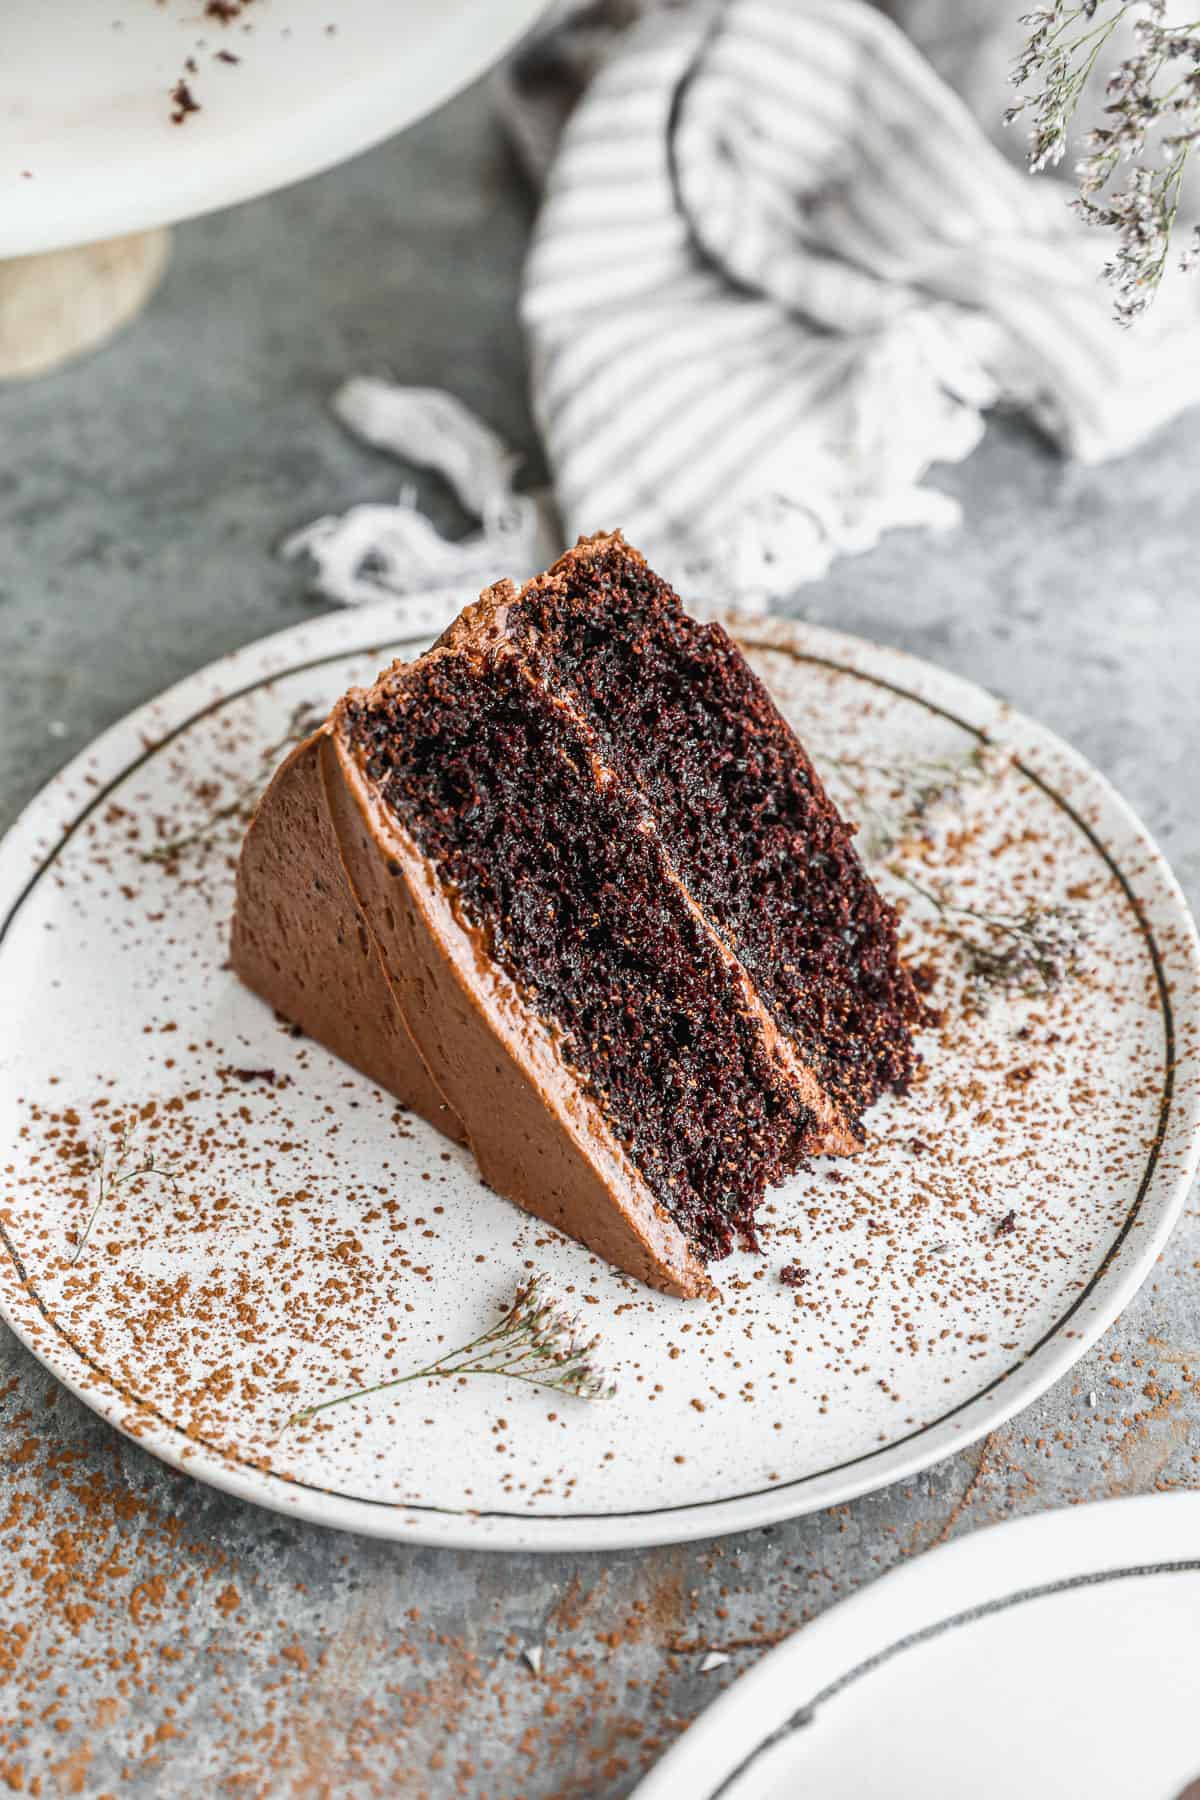 A slice of a two layer chocolate cake on a white plate, dusted with cocoa powder.